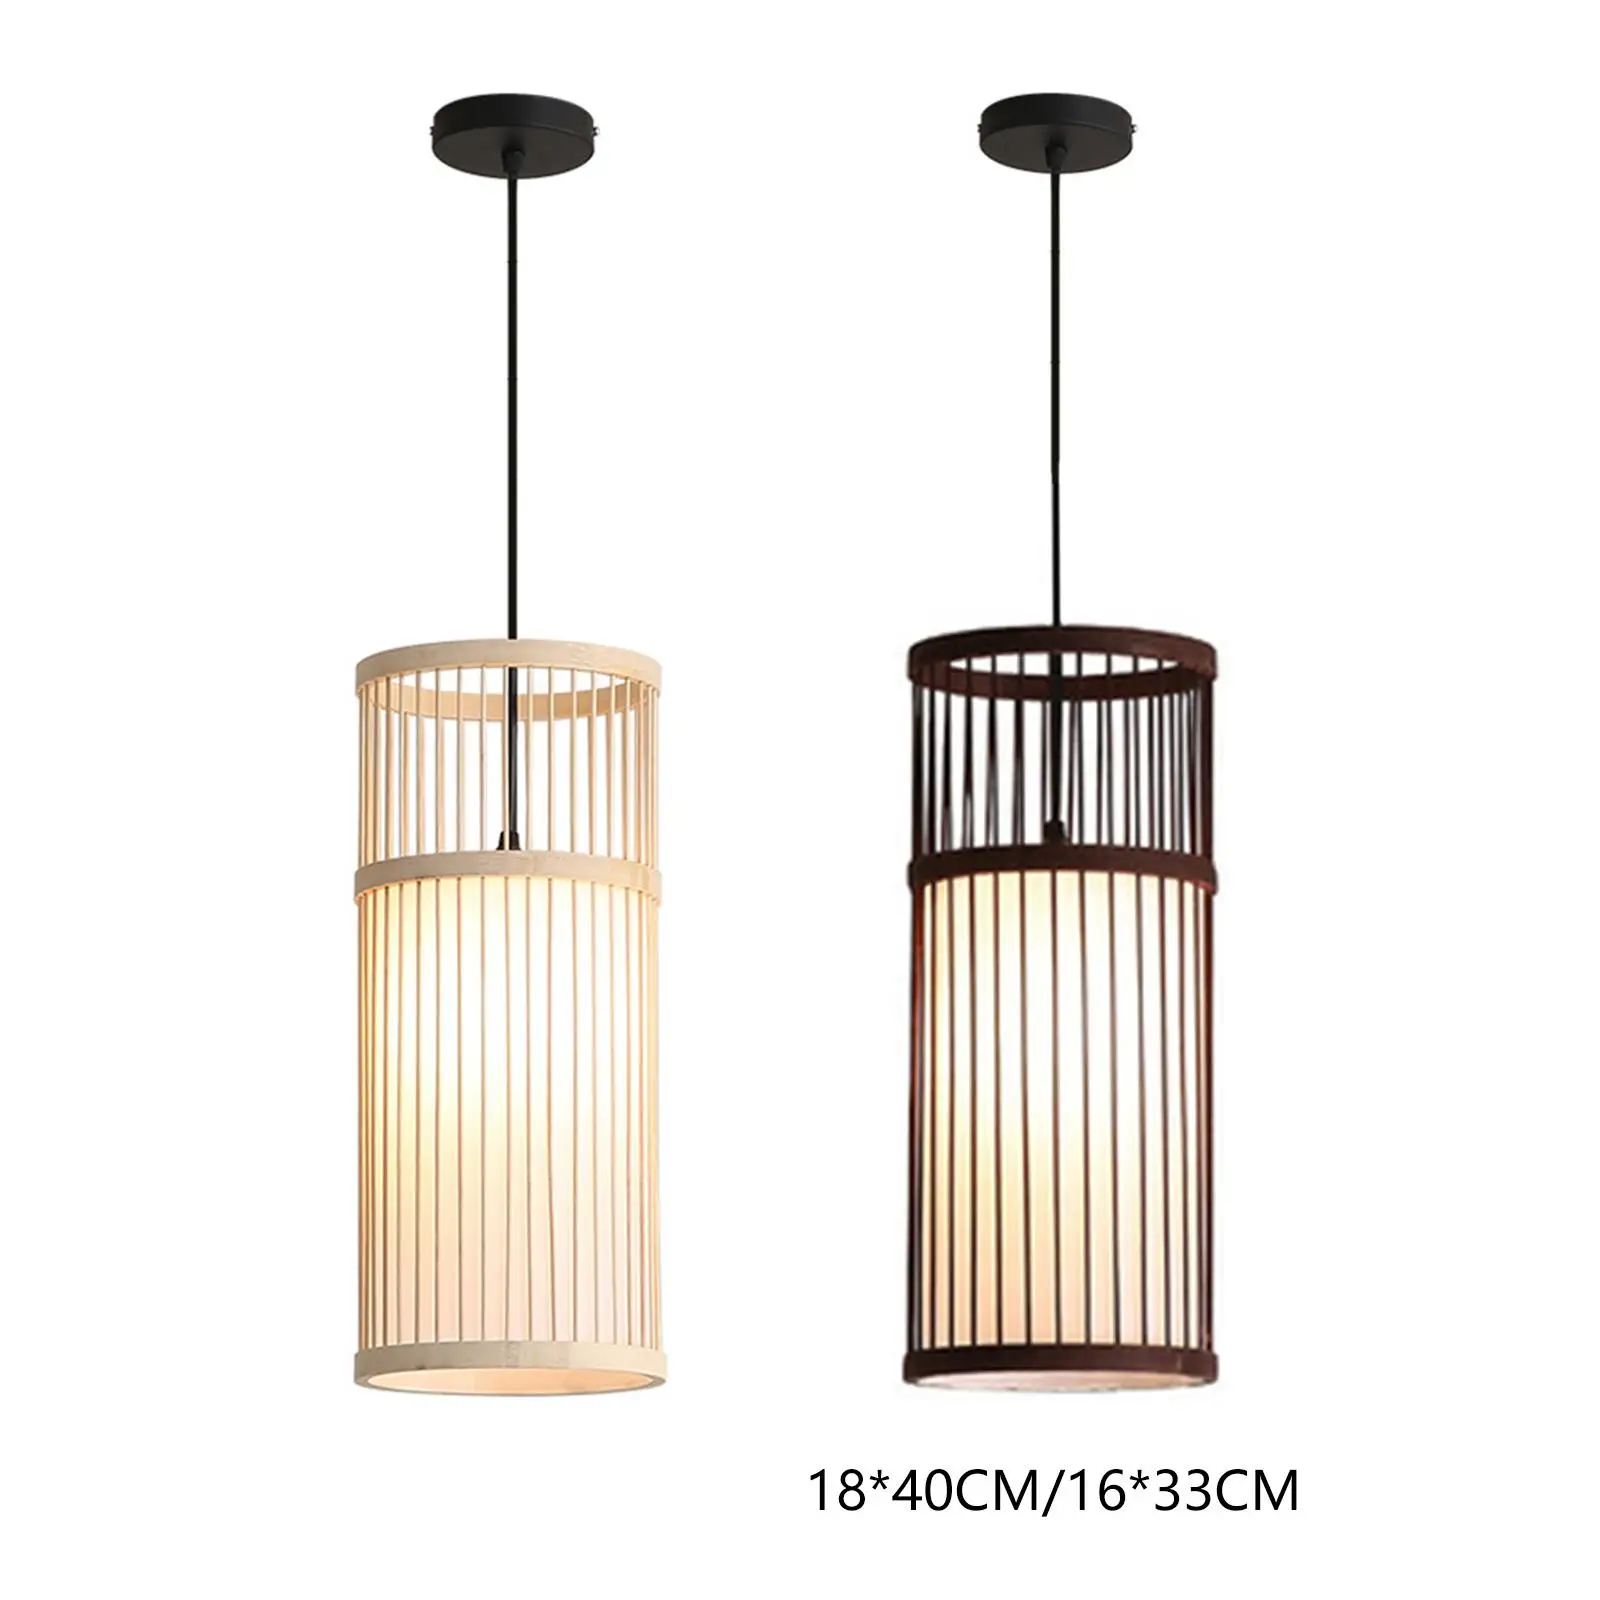 Bamboo Lamp Shade Pendant Light Lampshade Ceiling Light Fixture for Farmhouse Country Home Kitchen Decoration